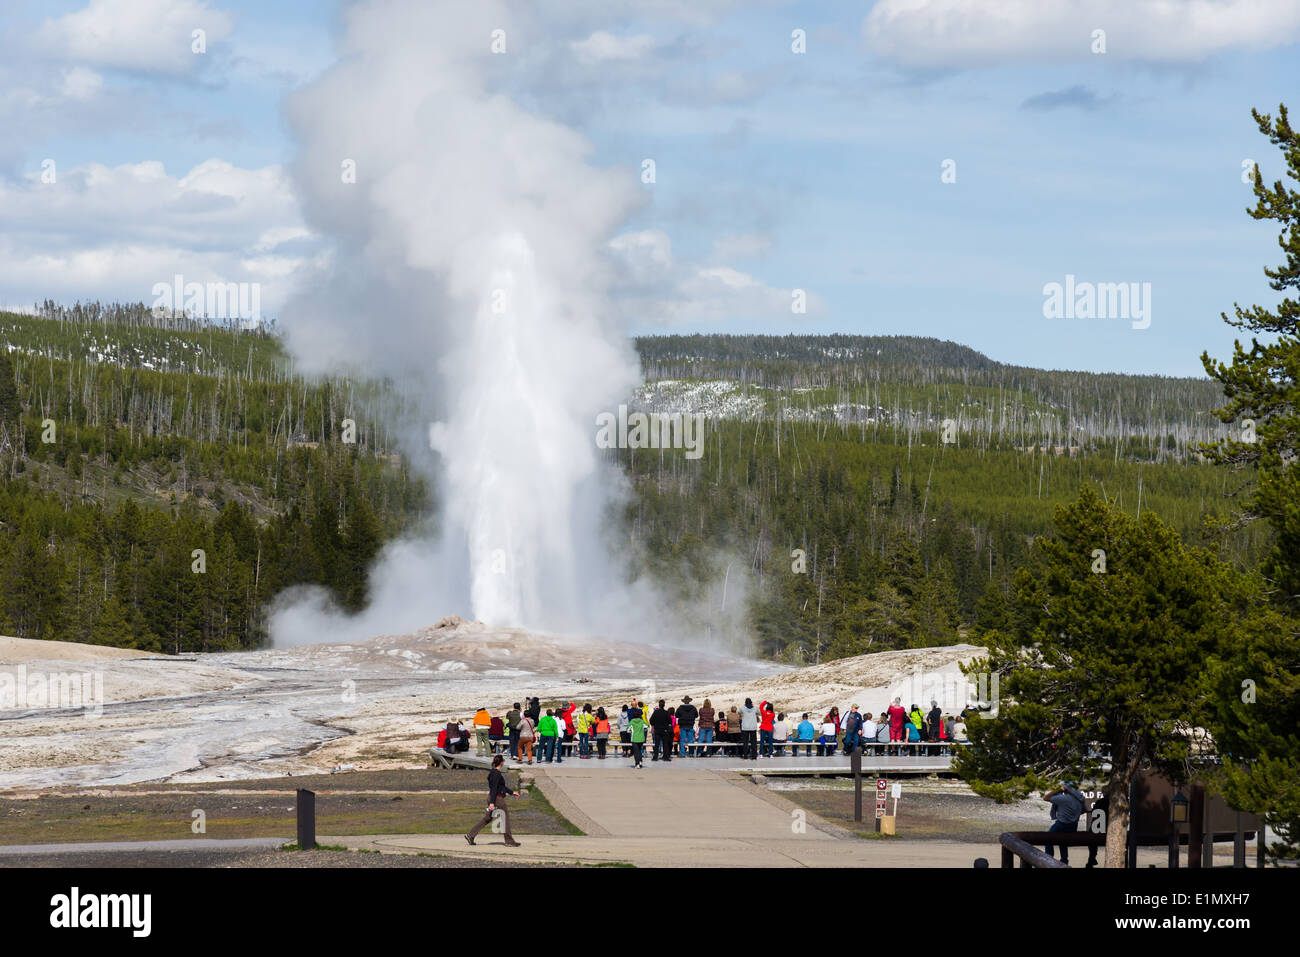 Crowd gather in front of the Old Faithful Geyser during an eruption. Yellowstone National Park, Wyoming, USA. Stock Photo